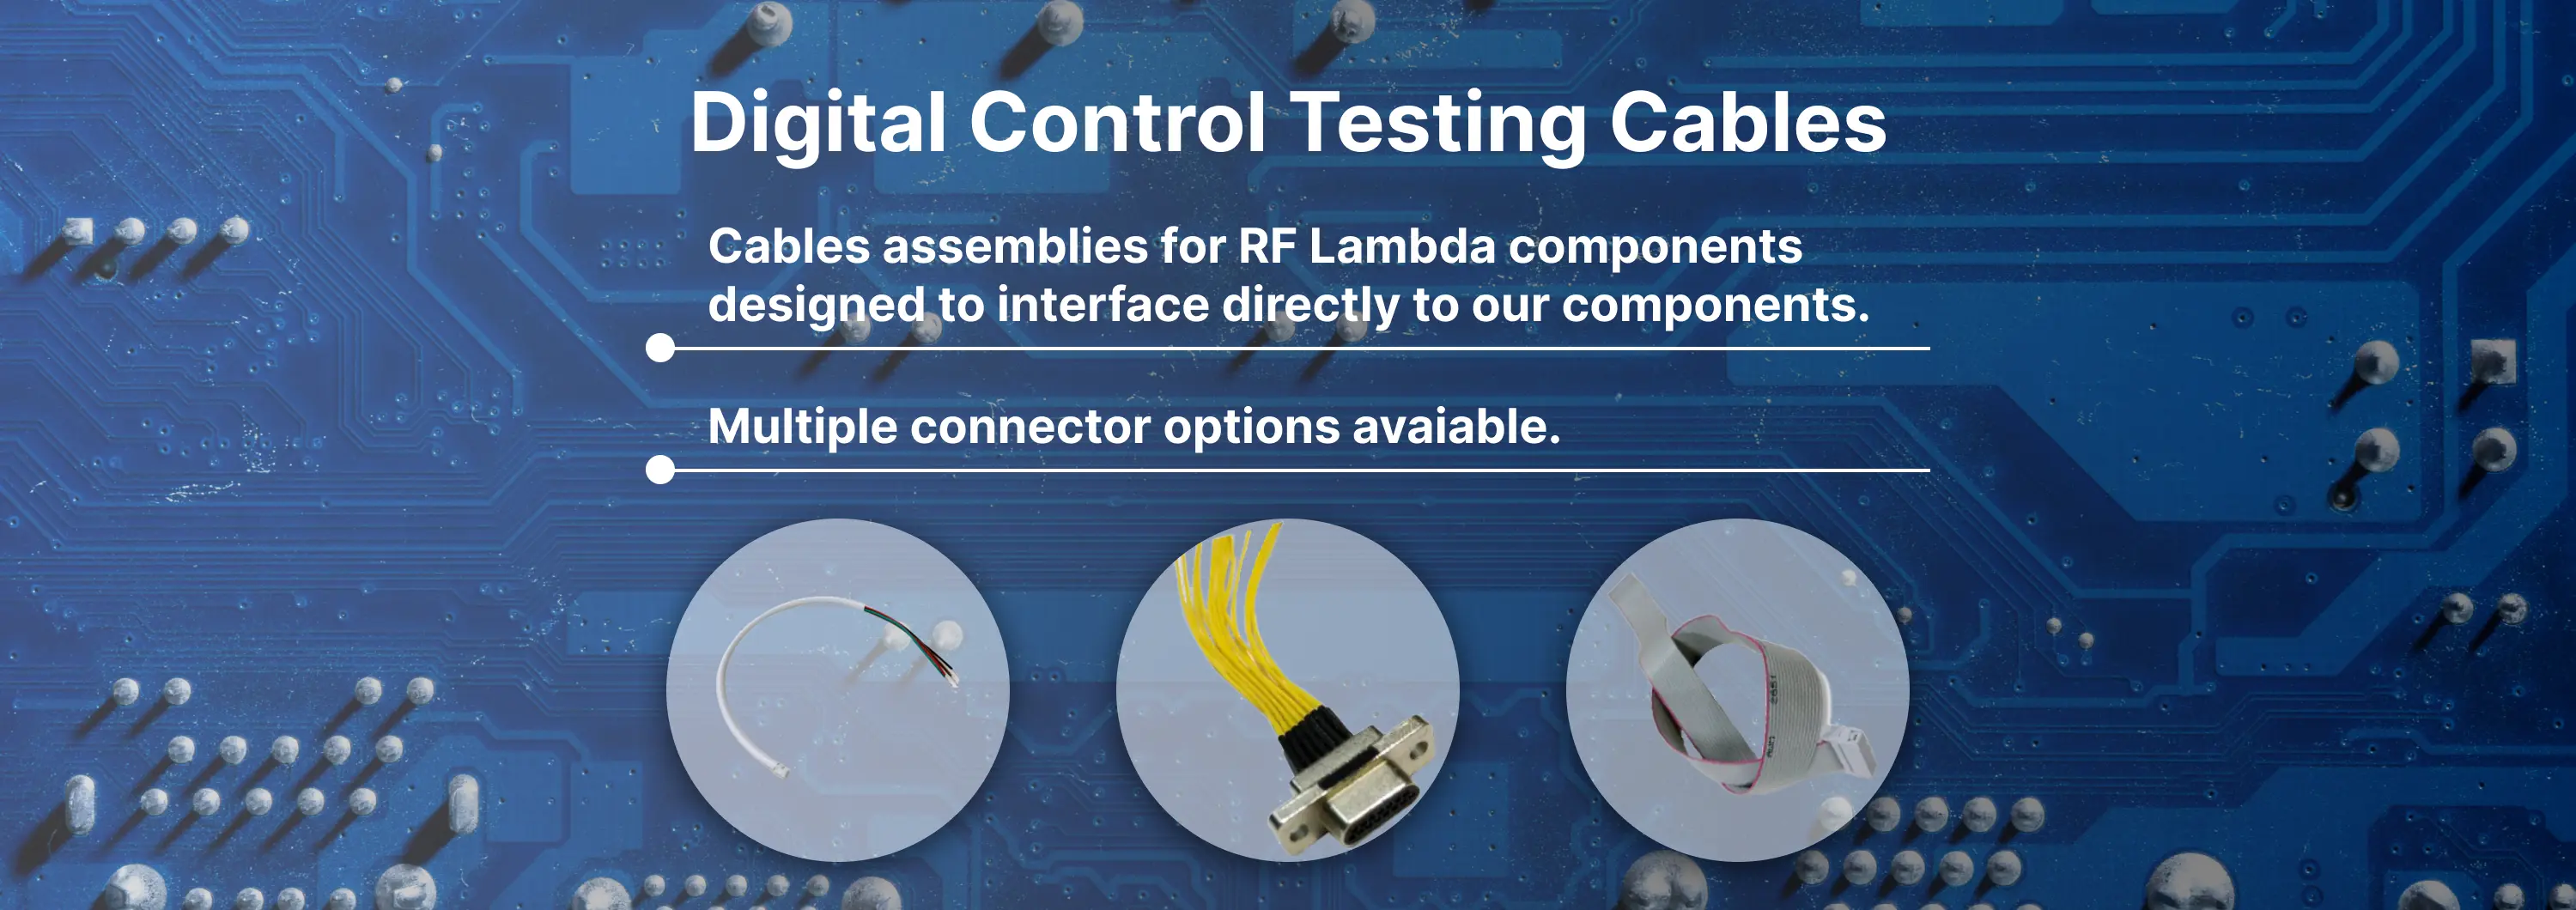 Digital Control Testing Cables Banner